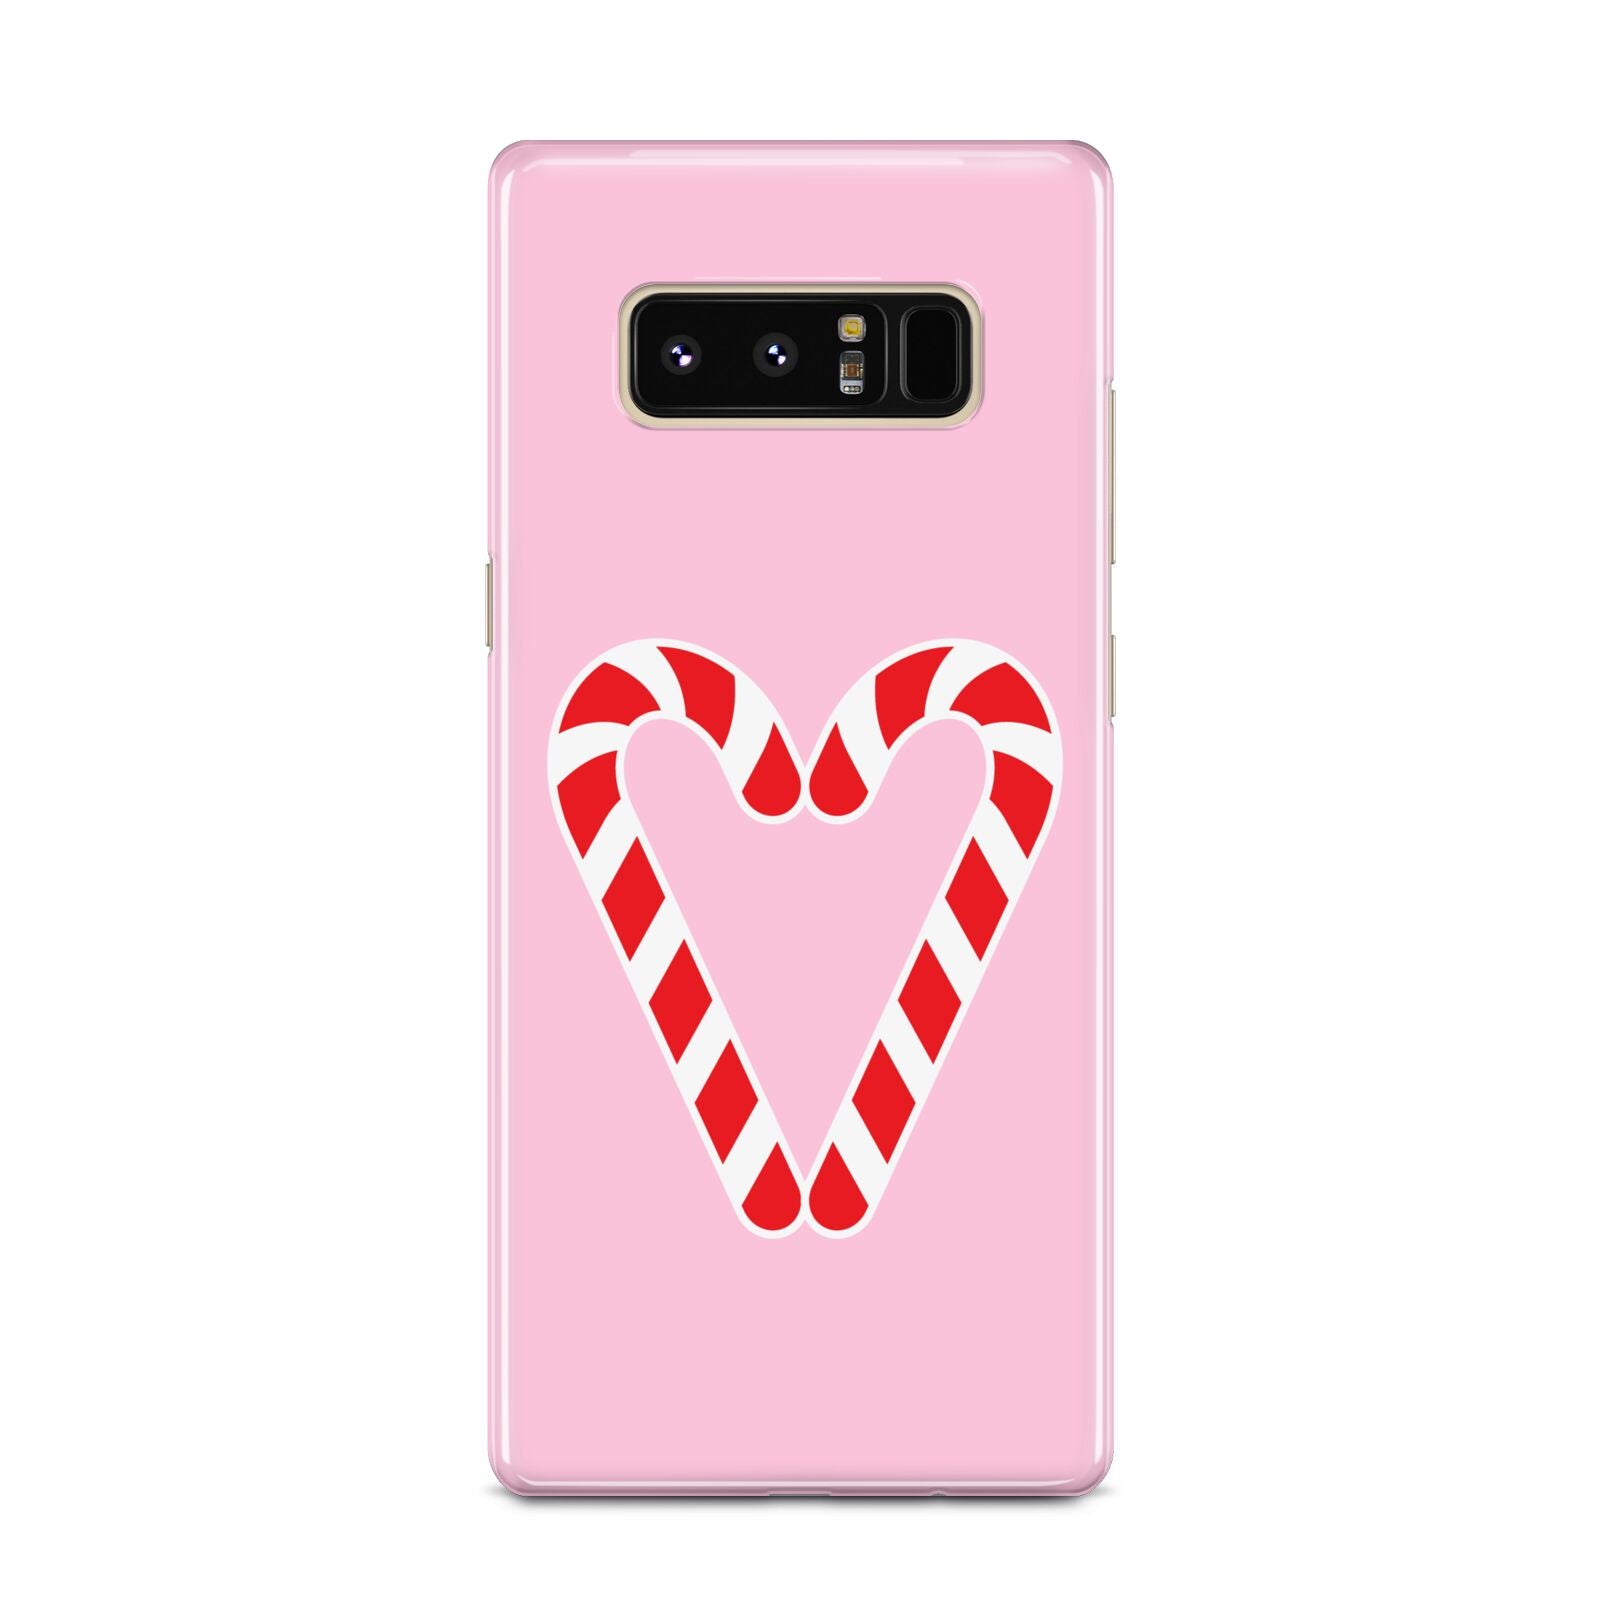 Candy Cane Heart Samsung Galaxy Note 8 Case